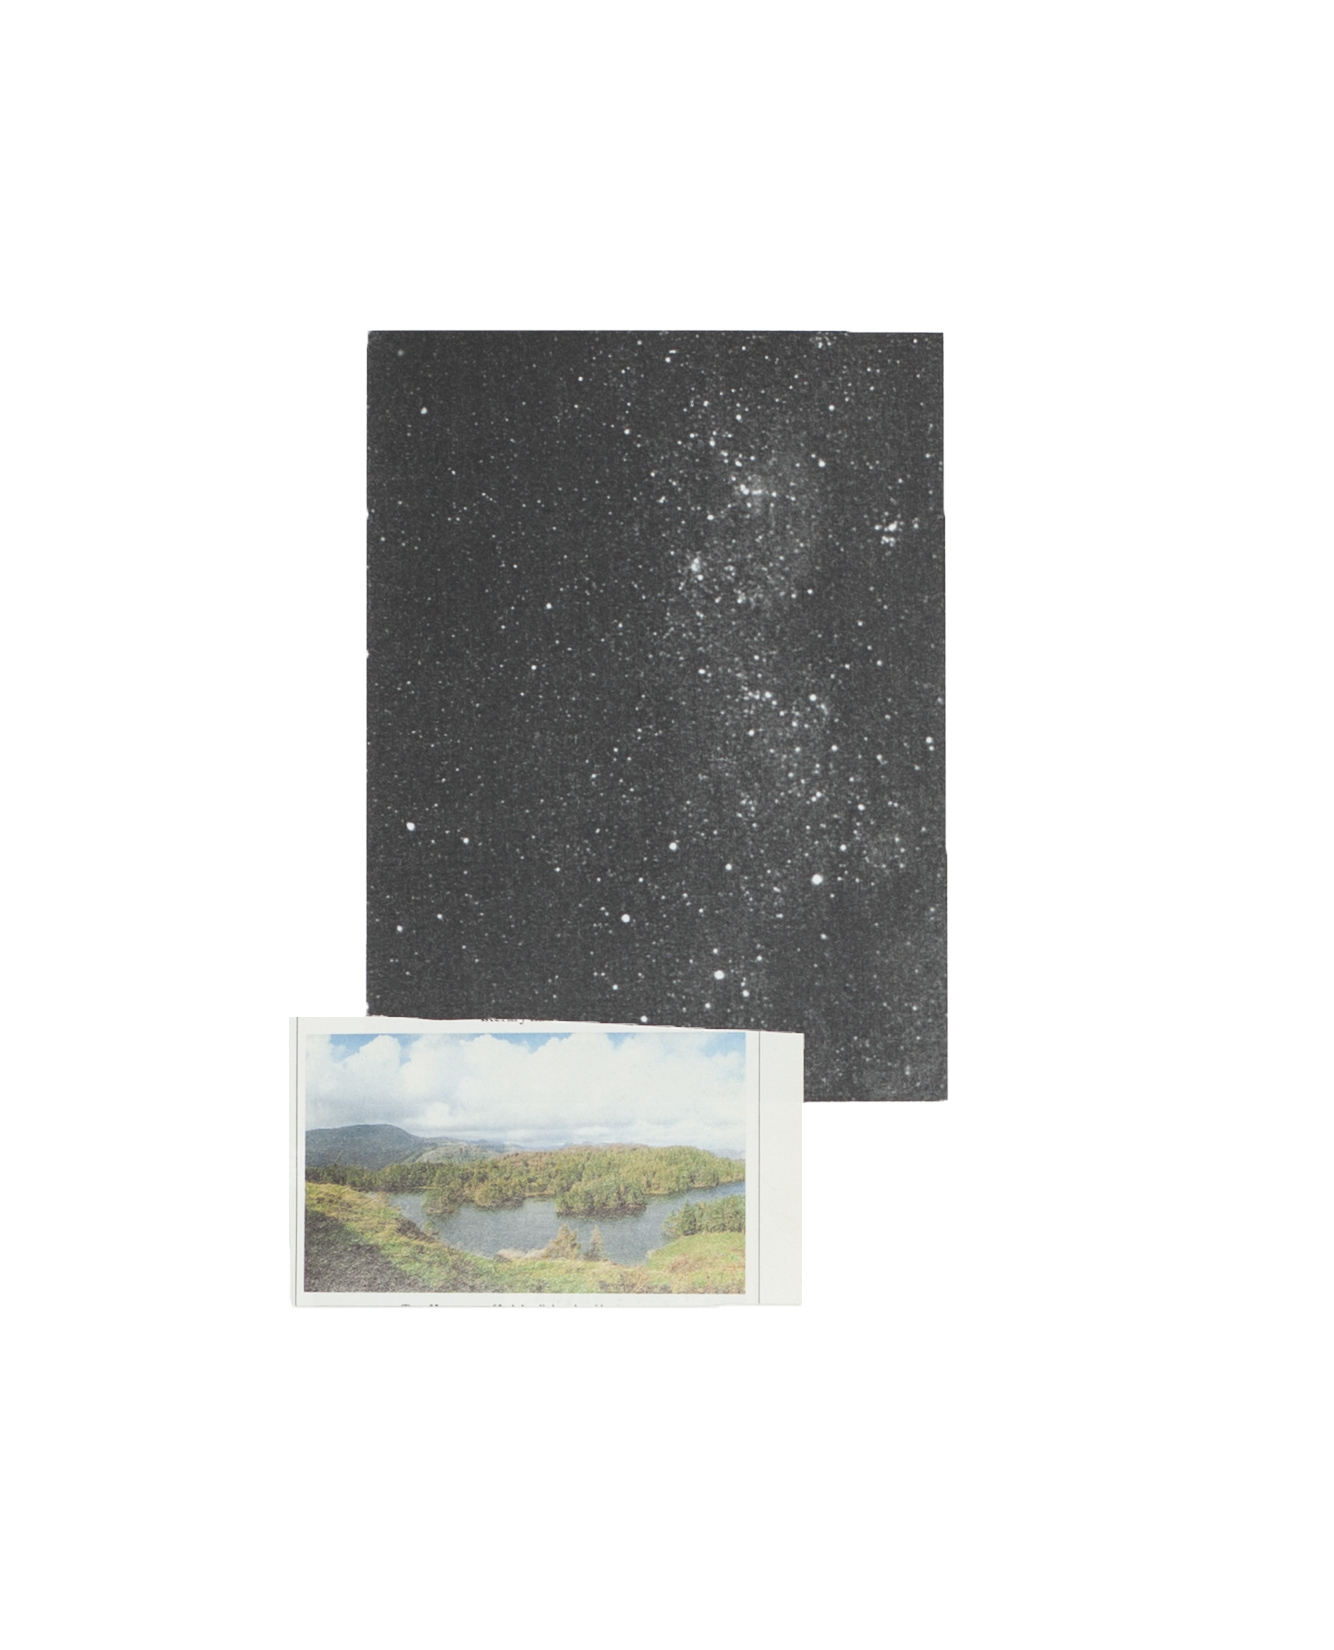 Paper collage of star sky and land